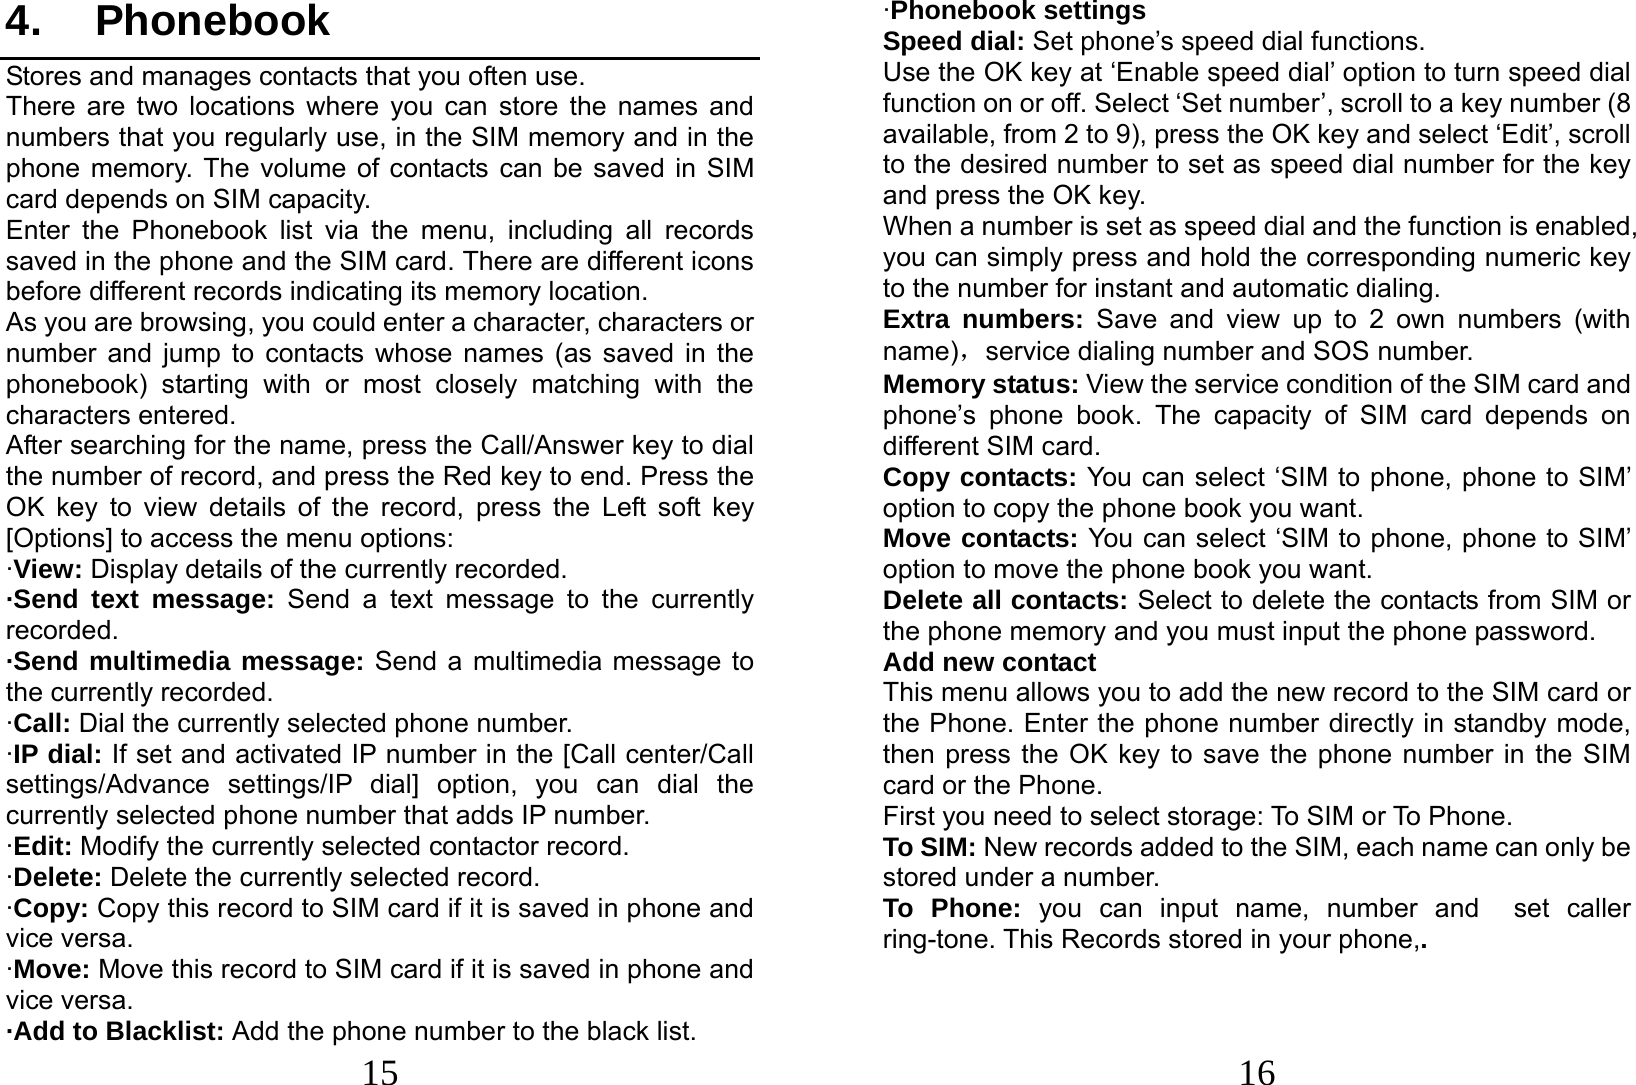  15 4. Phonebook Stores and manages contacts that you often use. There are two locations where you can store the names and numbers that you regularly use, in the SIM memory and in the phone memory. The volume of contacts can be saved in SIM card depends on SIM capacity.   Enter the Phonebook list via the menu, including all records saved in the phone and the SIM card. There are different icons before different records indicating its memory location. As you are browsing, you could enter a character, characters or number and jump to contacts whose names (as saved in the phonebook) starting with or most closely matching with the characters entered. After searching for the name, press the Call/Answer key to dial the number of record, and press the Red key to end. Press the OK key to view details of the record, press the Left soft key [Options] to access the menu options:   ·View: Display details of the currently recorded. ·Send text message: Send a text message to the currently recorded. ·Send multimedia message: Send a multimedia message to the currently recorded. ·Call: Dial the currently selected phone number. ·IP dial: If set and activated IP number in the [Call center/Call settings/Advance settings/IP dial] option, you can dial the currently selected phone number that adds IP number. ·Edit: Modify the currently selected contactor record. ·Delete: Delete the currently selected record. ·Copy: Copy this record to SIM card if it is saved in phone and vice versa. ·Move: Move this record to SIM card if it is saved in phone and vice versa. ·Add to Blacklist: Add the phone number to the black list.    16 ·Phonebook settings Speed dial: Set phone’s speed dial functions. Use the OK key at ‘Enable speed dial’ option to turn speed dial function on or off. Select ‘Set number’, scroll to a key number (8 available, from 2 to 9), press the OK key and select ‘Edit’, scroll to the desired number to set as speed dial number for the key and press the OK key.   When a number is set as speed dial and the function is enabled, you can simply press and hold the corresponding numeric key to the number for instant and automatic dialing. Extra numbers: Save and view up to 2 own numbers (with name)，service dialing number and SOS number. Memory status: View the service condition of the SIM card and phone’s phone book. The capacity of SIM card depends on different SIM card. Copy contacts: You can select ‘SIM to phone, phone to SIM’ option to copy the phone book you want. Move contacts: You can select ‘SIM to phone, phone to SIM’ option to move the phone book you want.   Delete all contacts: Select to delete the contacts from SIM or the phone memory and you must input the phone password. Add new contact This menu allows you to add the new record to the SIM card or the Phone. Enter the phone number directly in standby mode, then press the OK key to save the phone number in the SIM card or the Phone.   First you need to select storage: To SIM or To Phone. To SIM: New records added to the SIM, each name can only be stored under a number. To Phone: you can input name, number and  set caller ring-tone. This Records stored in your phone,.   